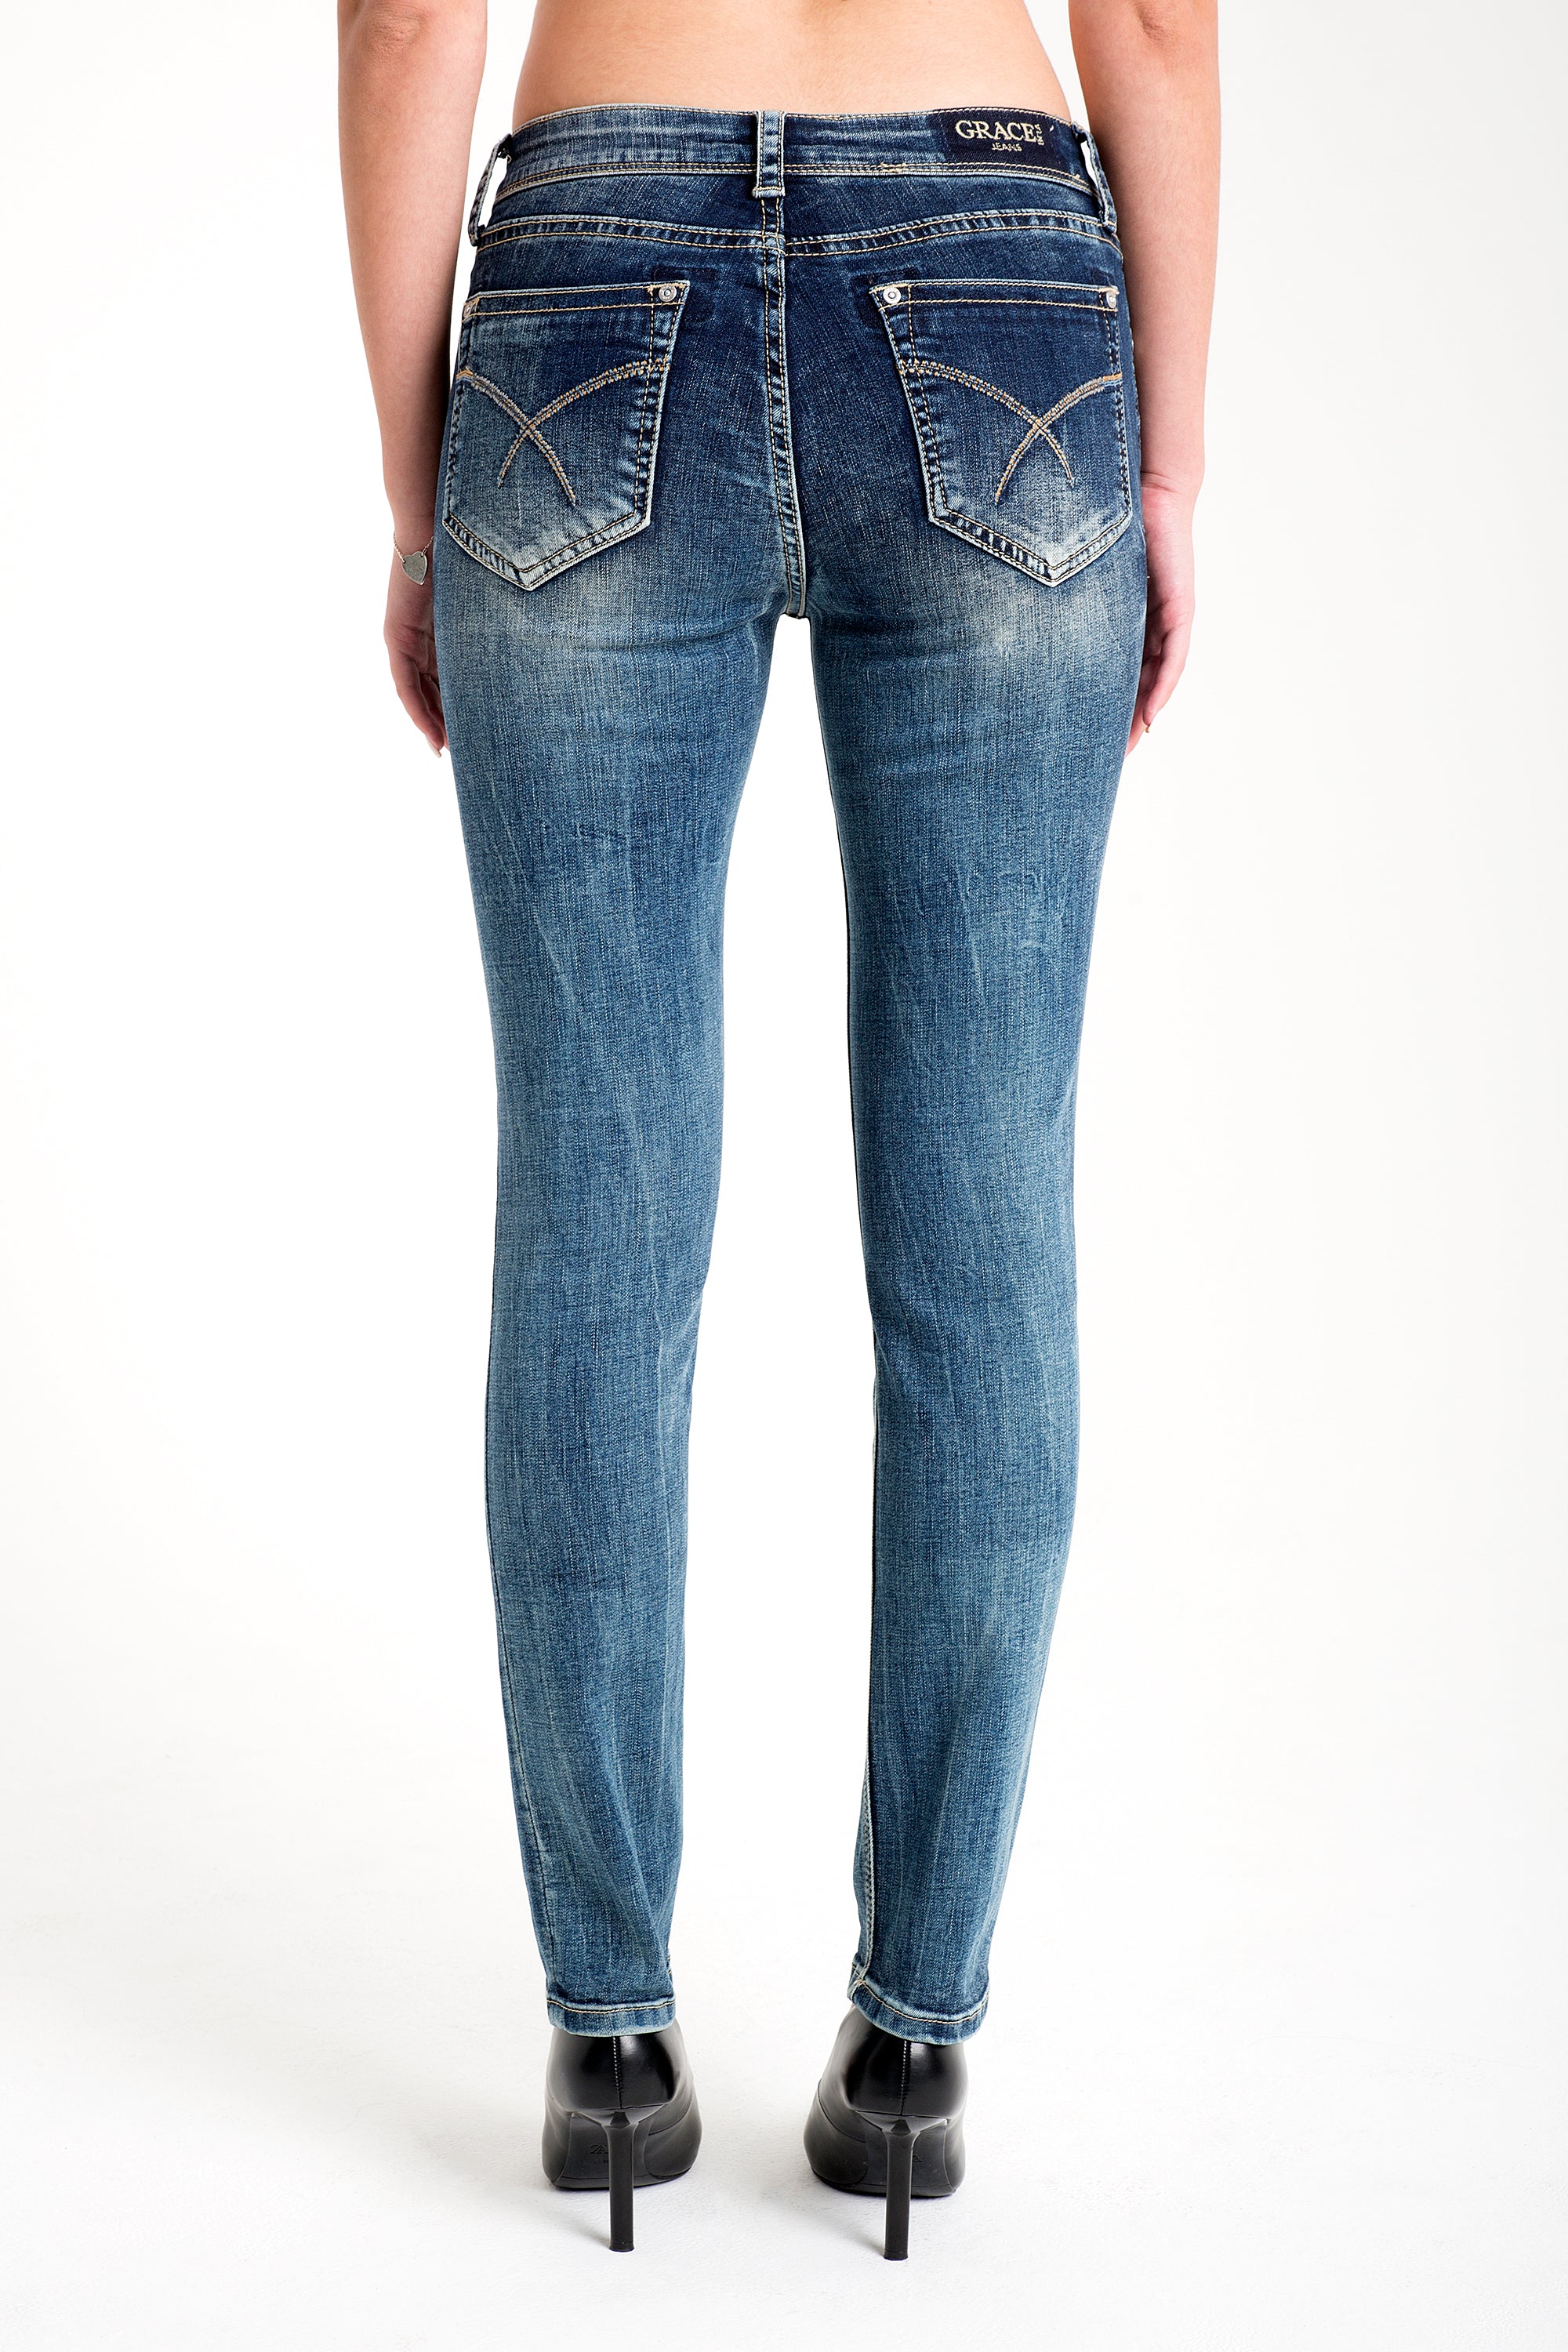 Simple Stitches Details Med Blue Mid Rise Skinny Jeans